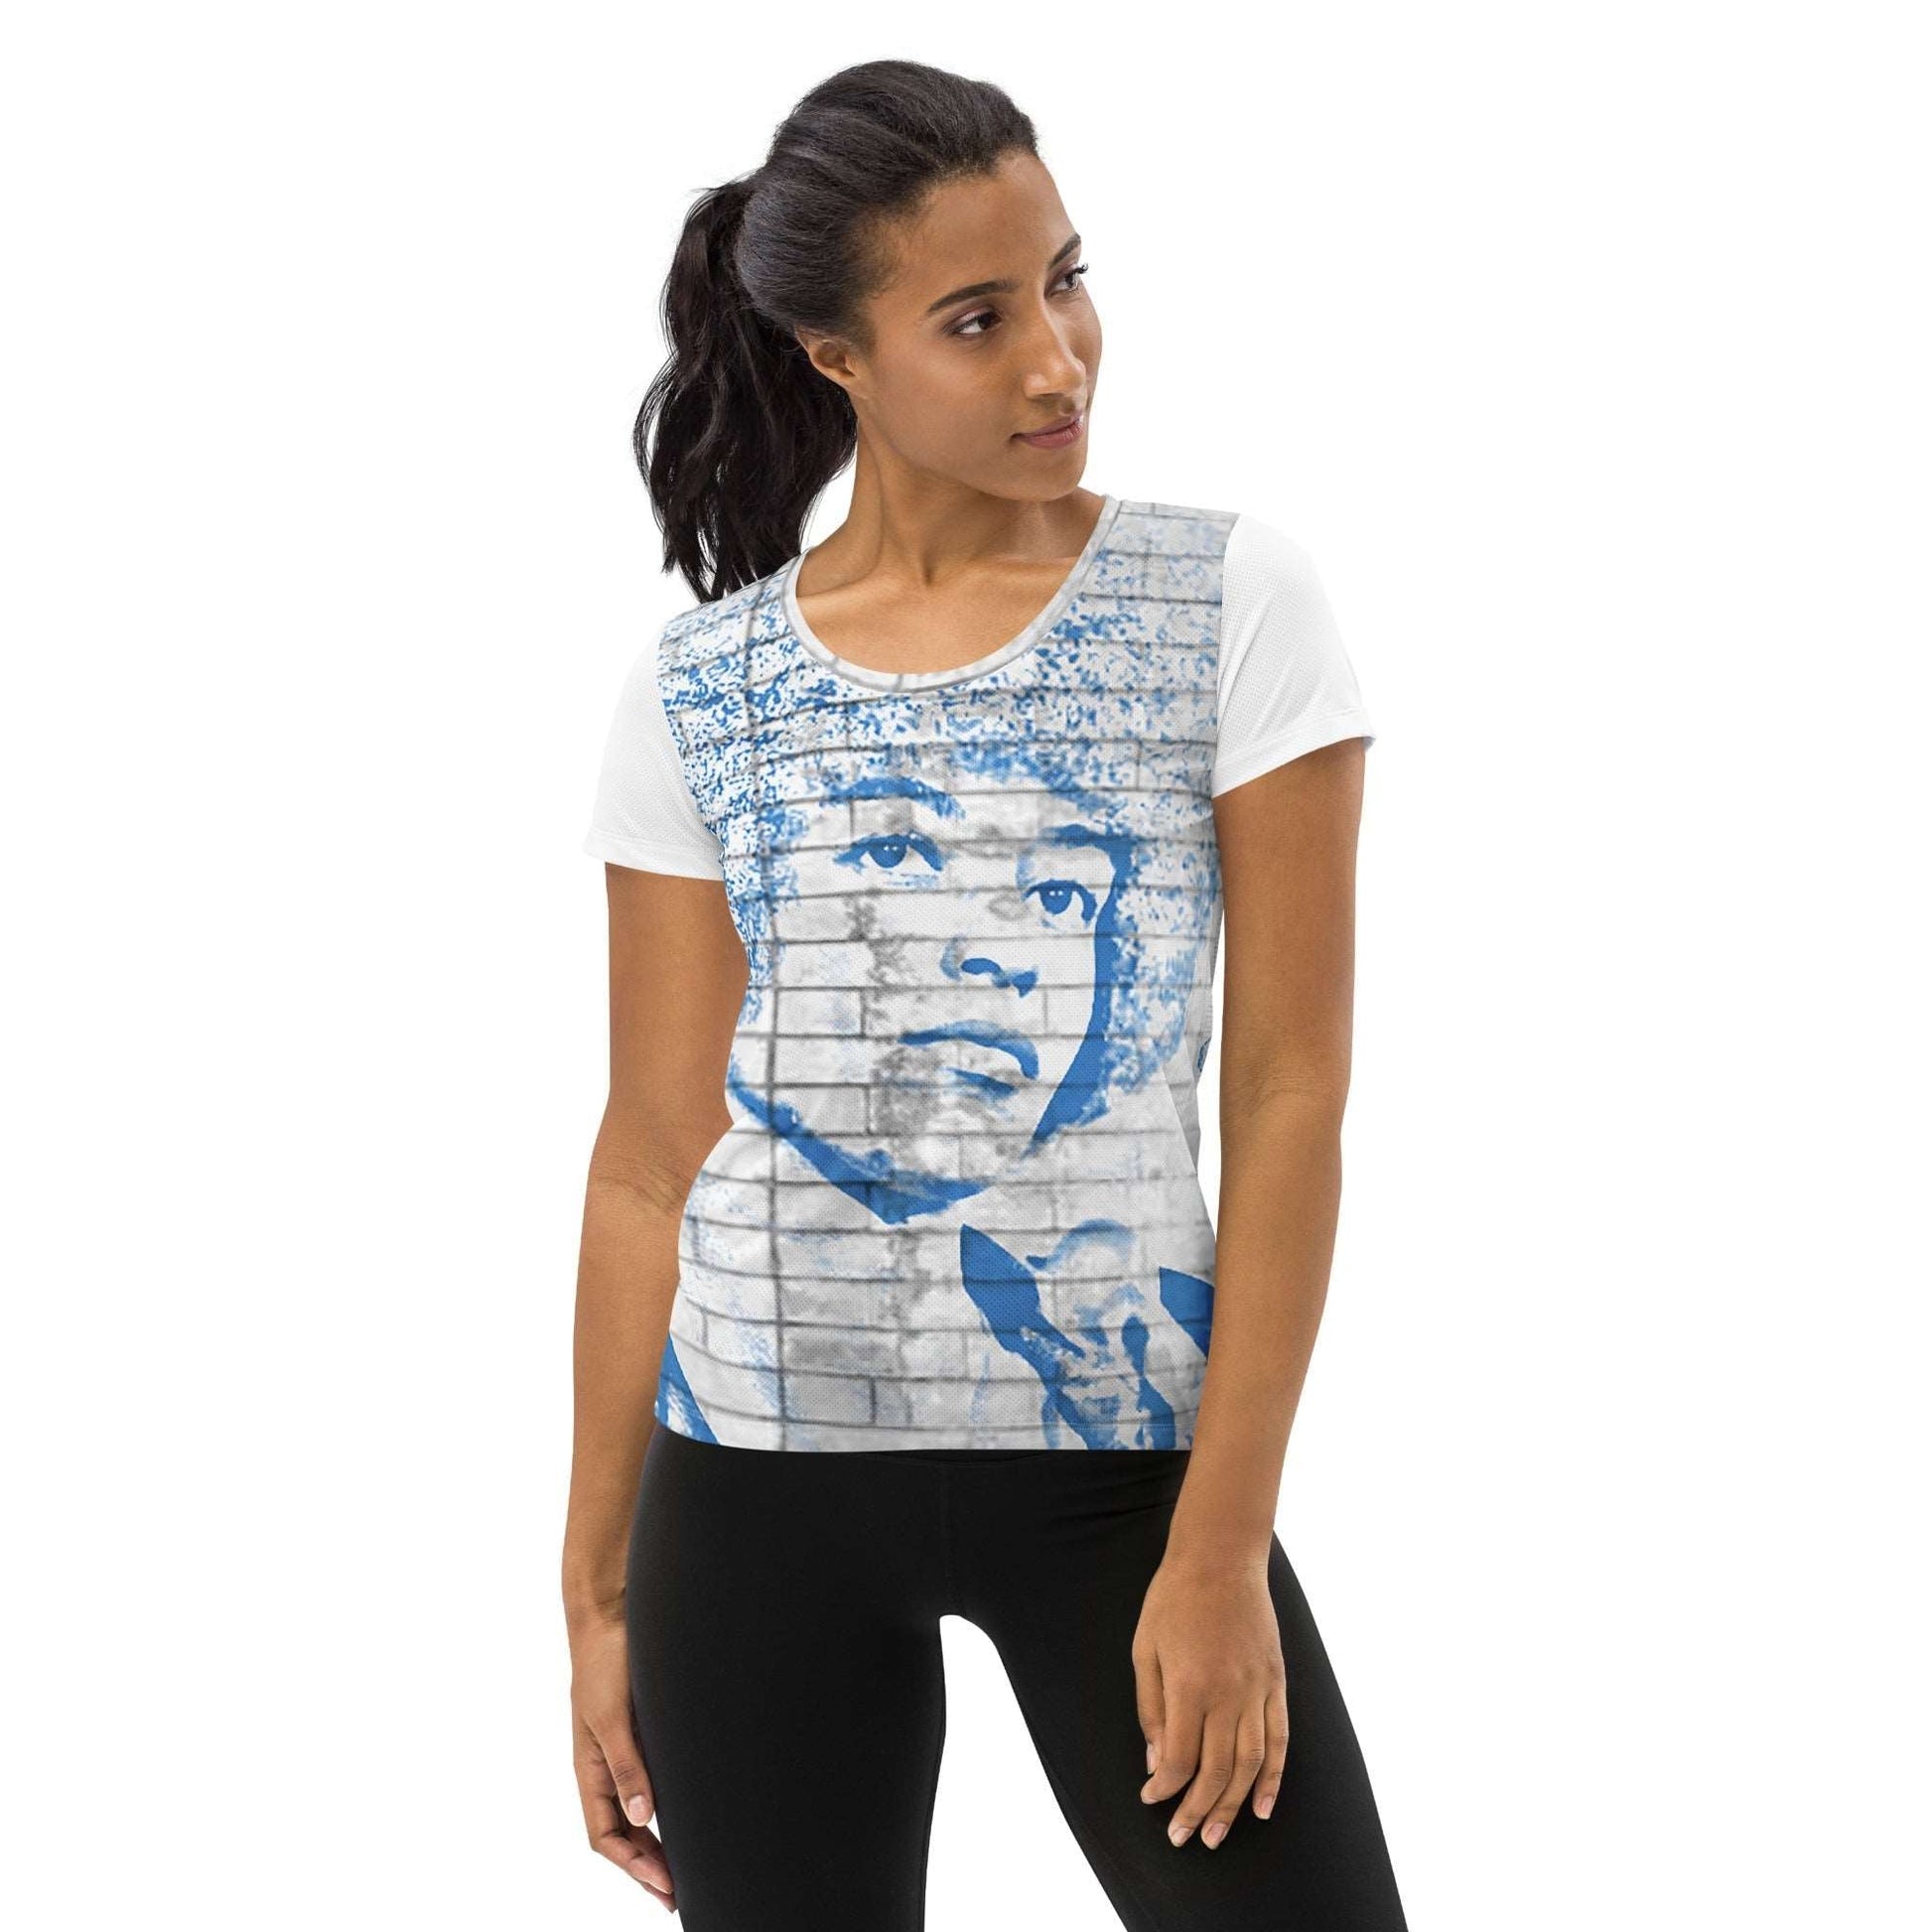 Angela Davis All-Over Print Women's Athletic T-shirt - Souled Out World